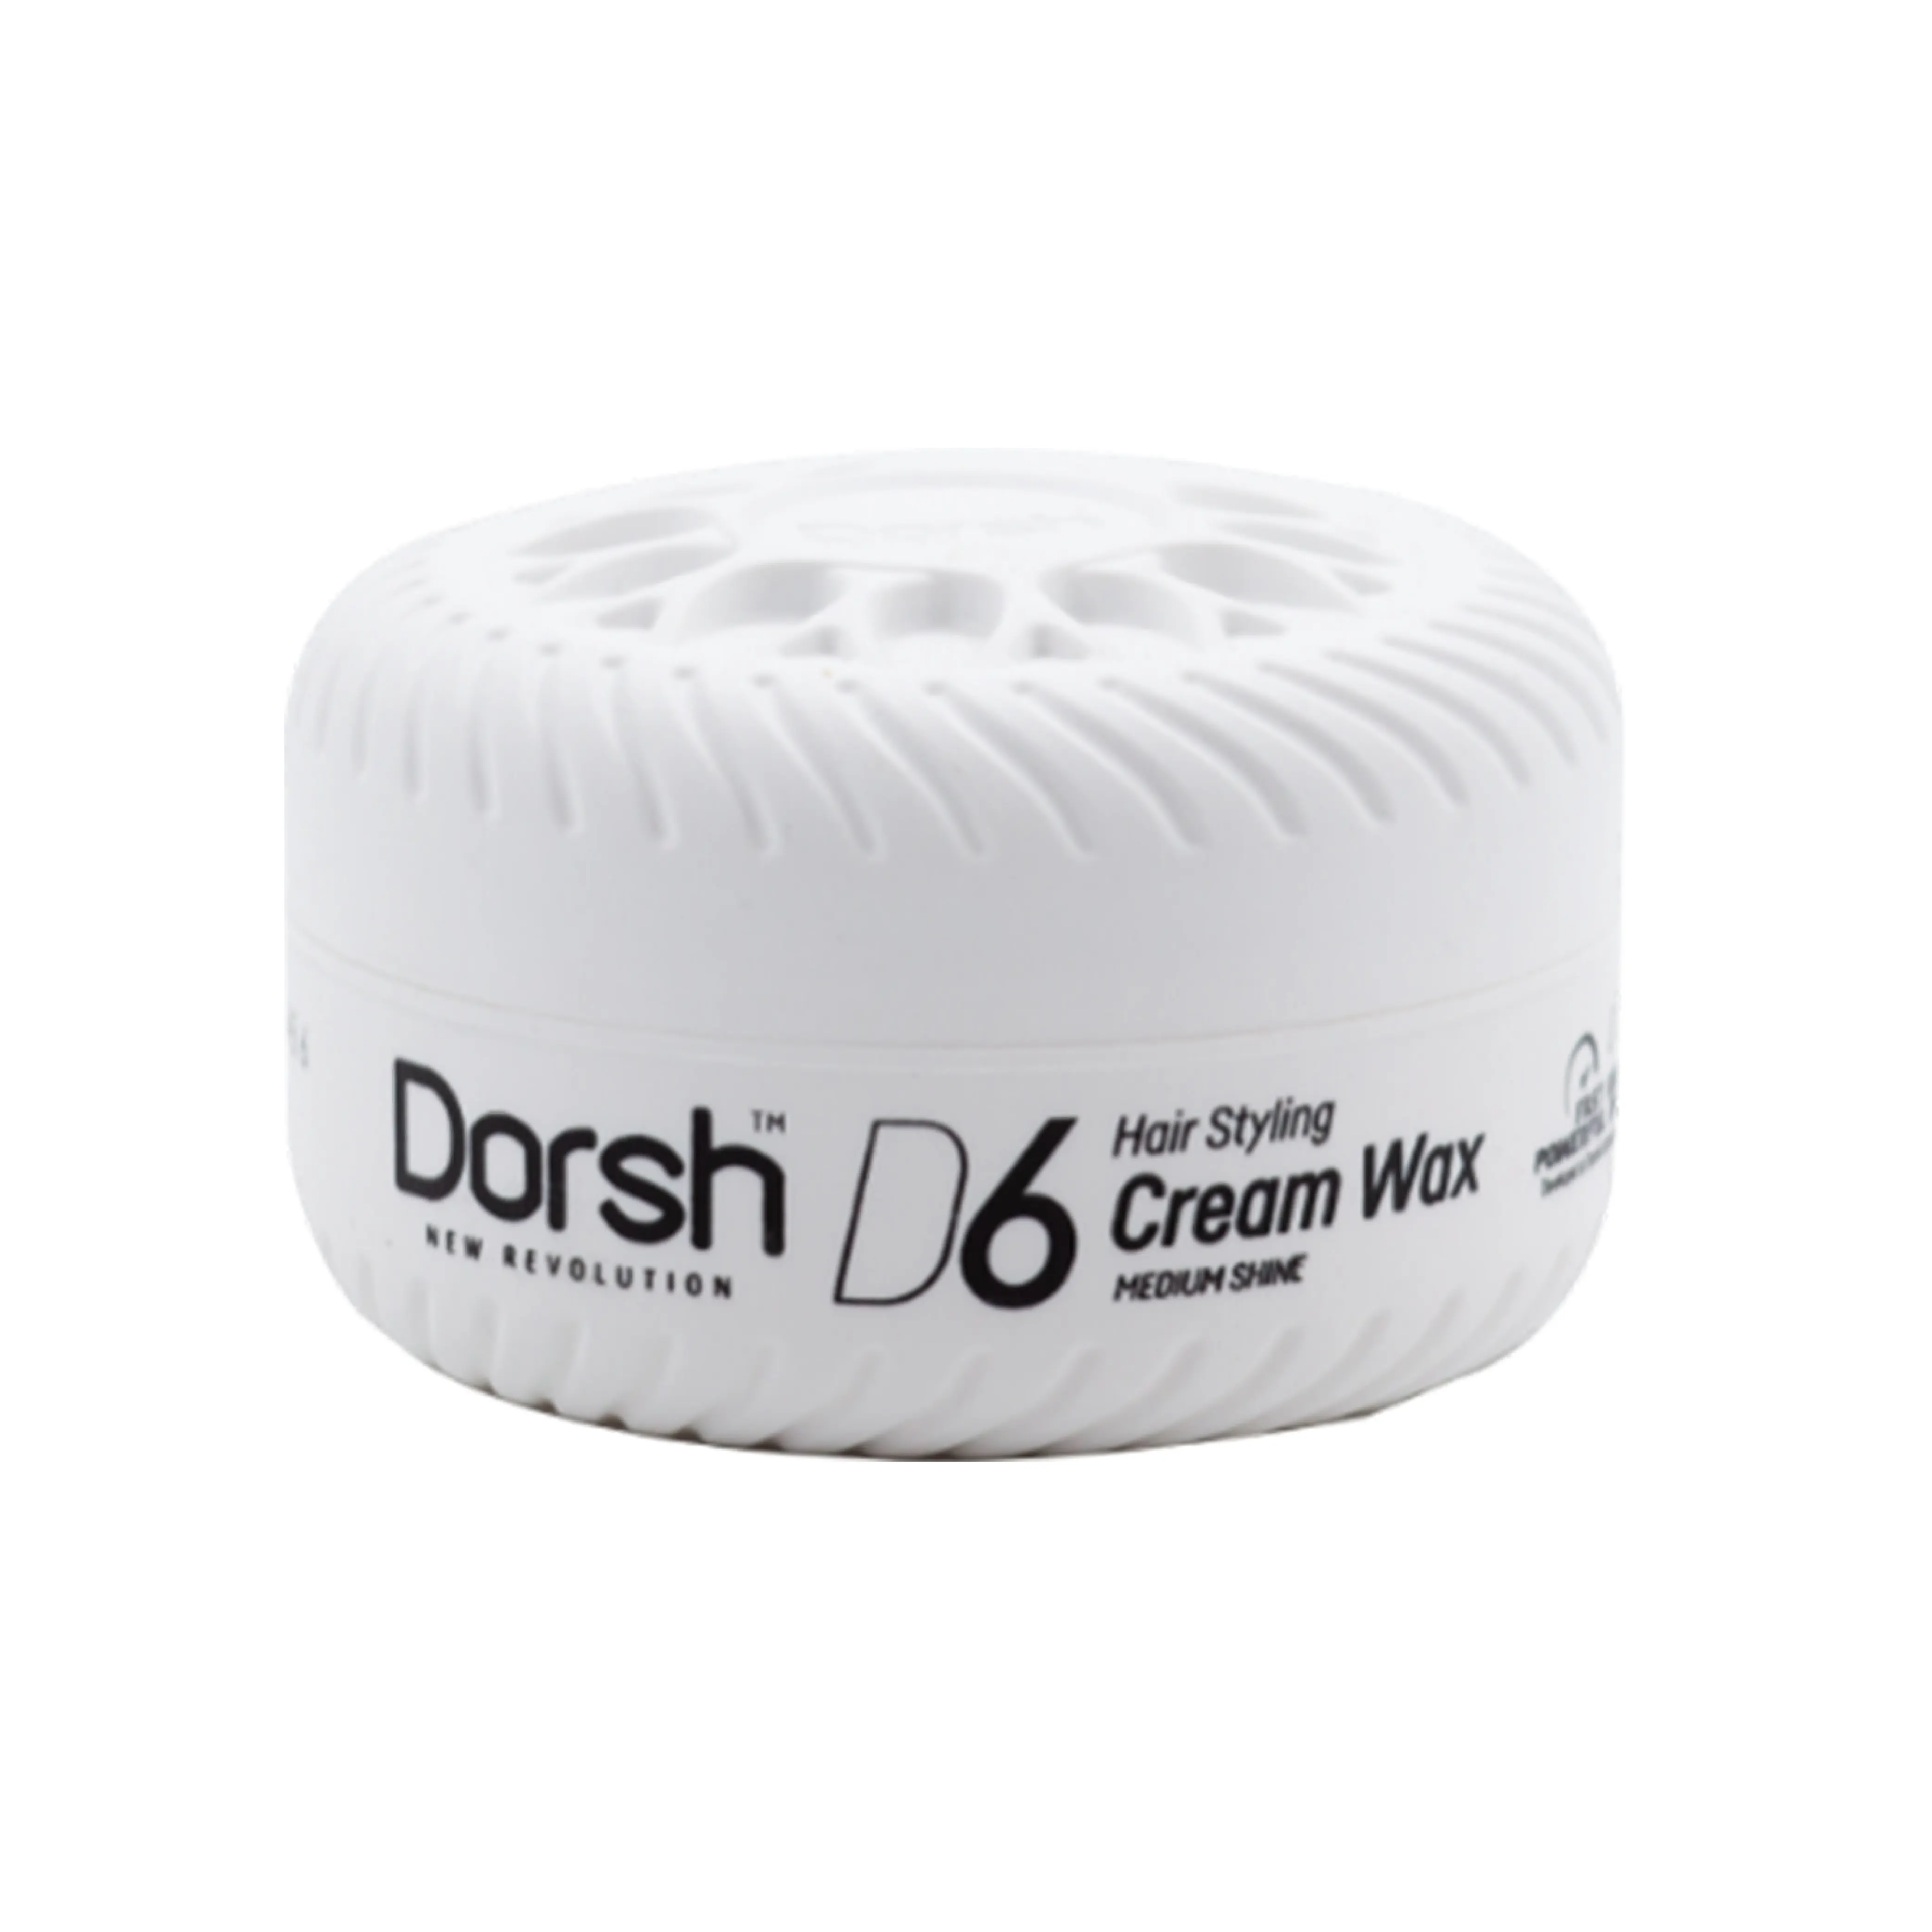 DORSH HAIR STYLING CREAM WAX - D6 150 ML Matte Hair Wax Strong Hold Hair Wax from Turkey with Best Price